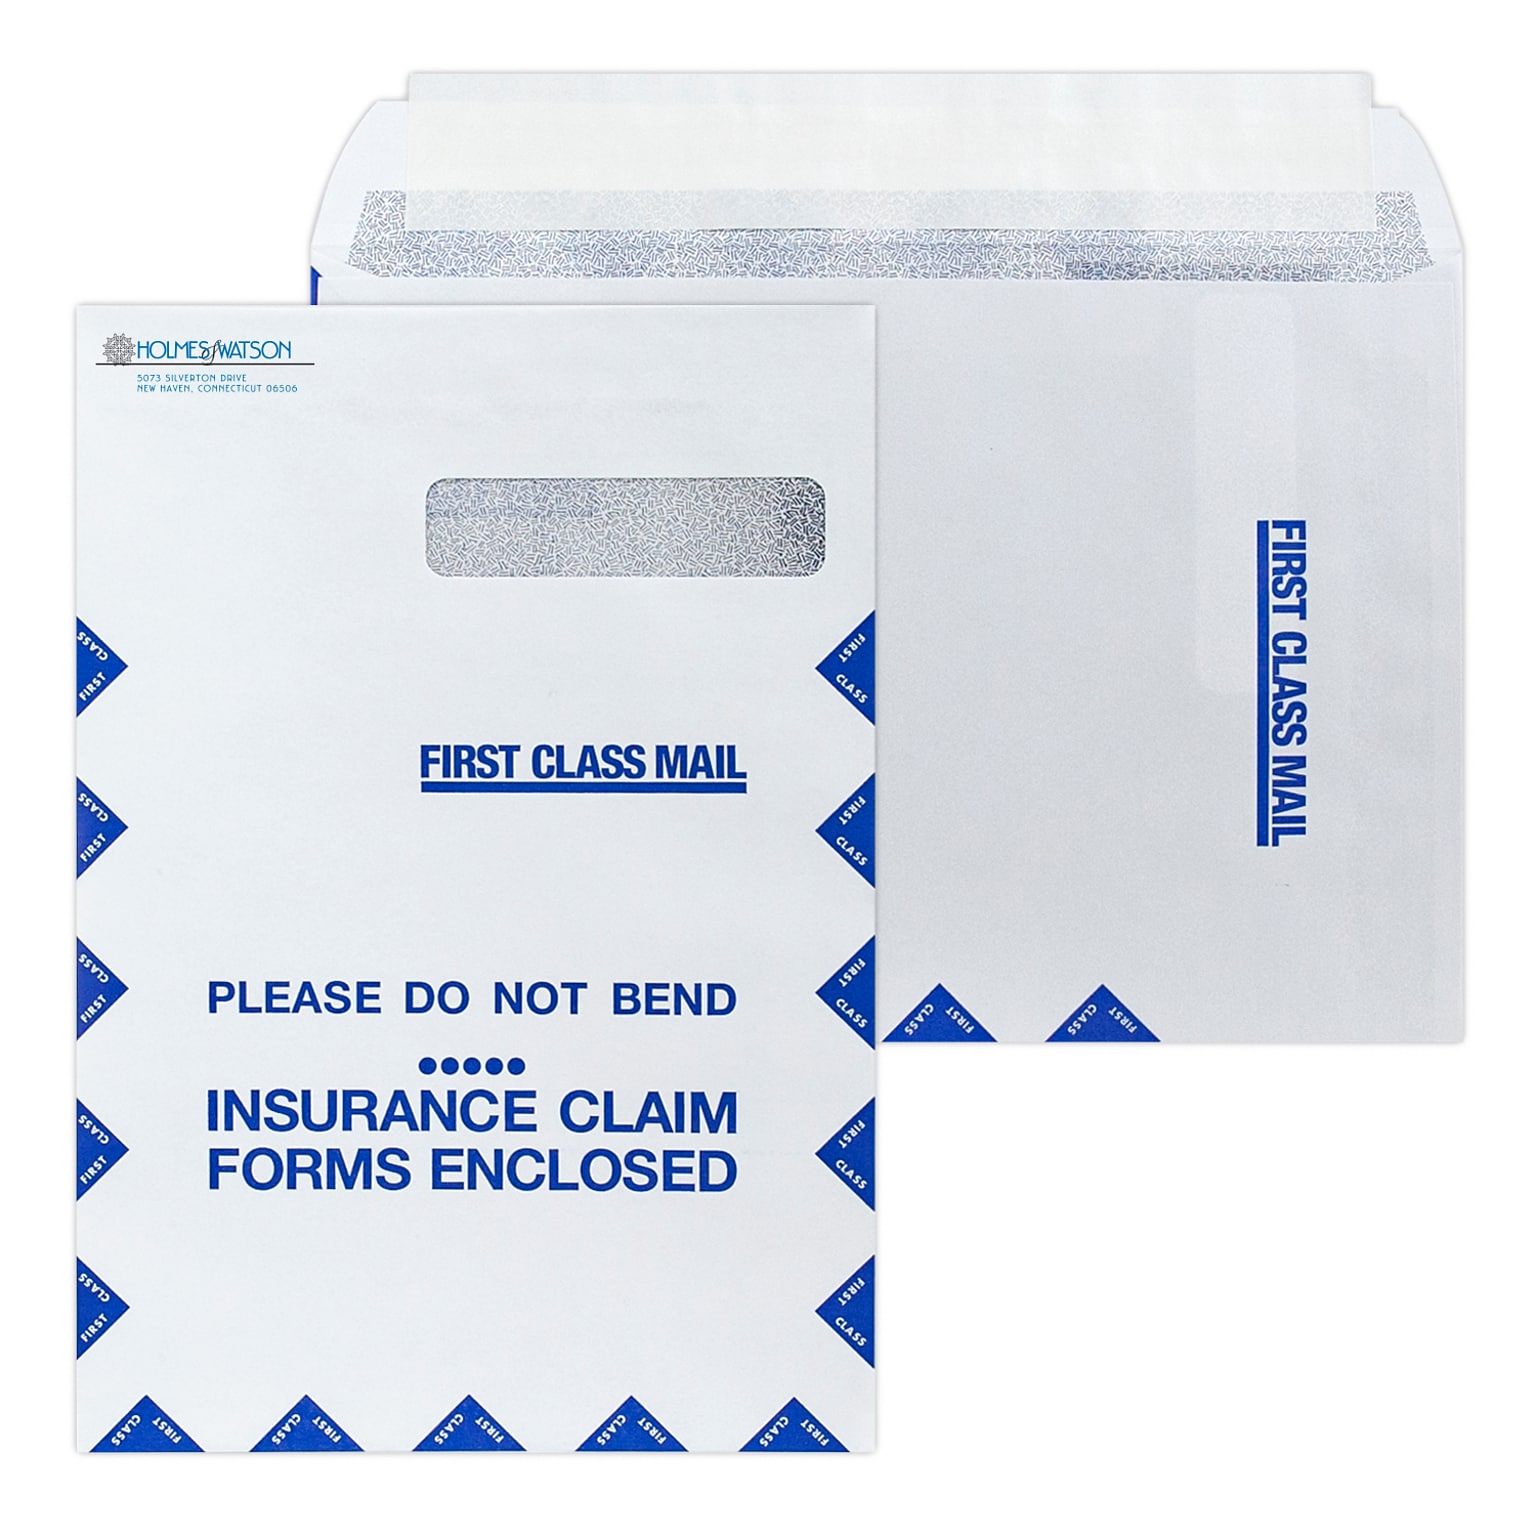 Custom 9 x 13 Resubmission Right Window Self Seal Envelopes with Security Tint, 24# White Wove, 2 Standard Inks, 250 / Pack